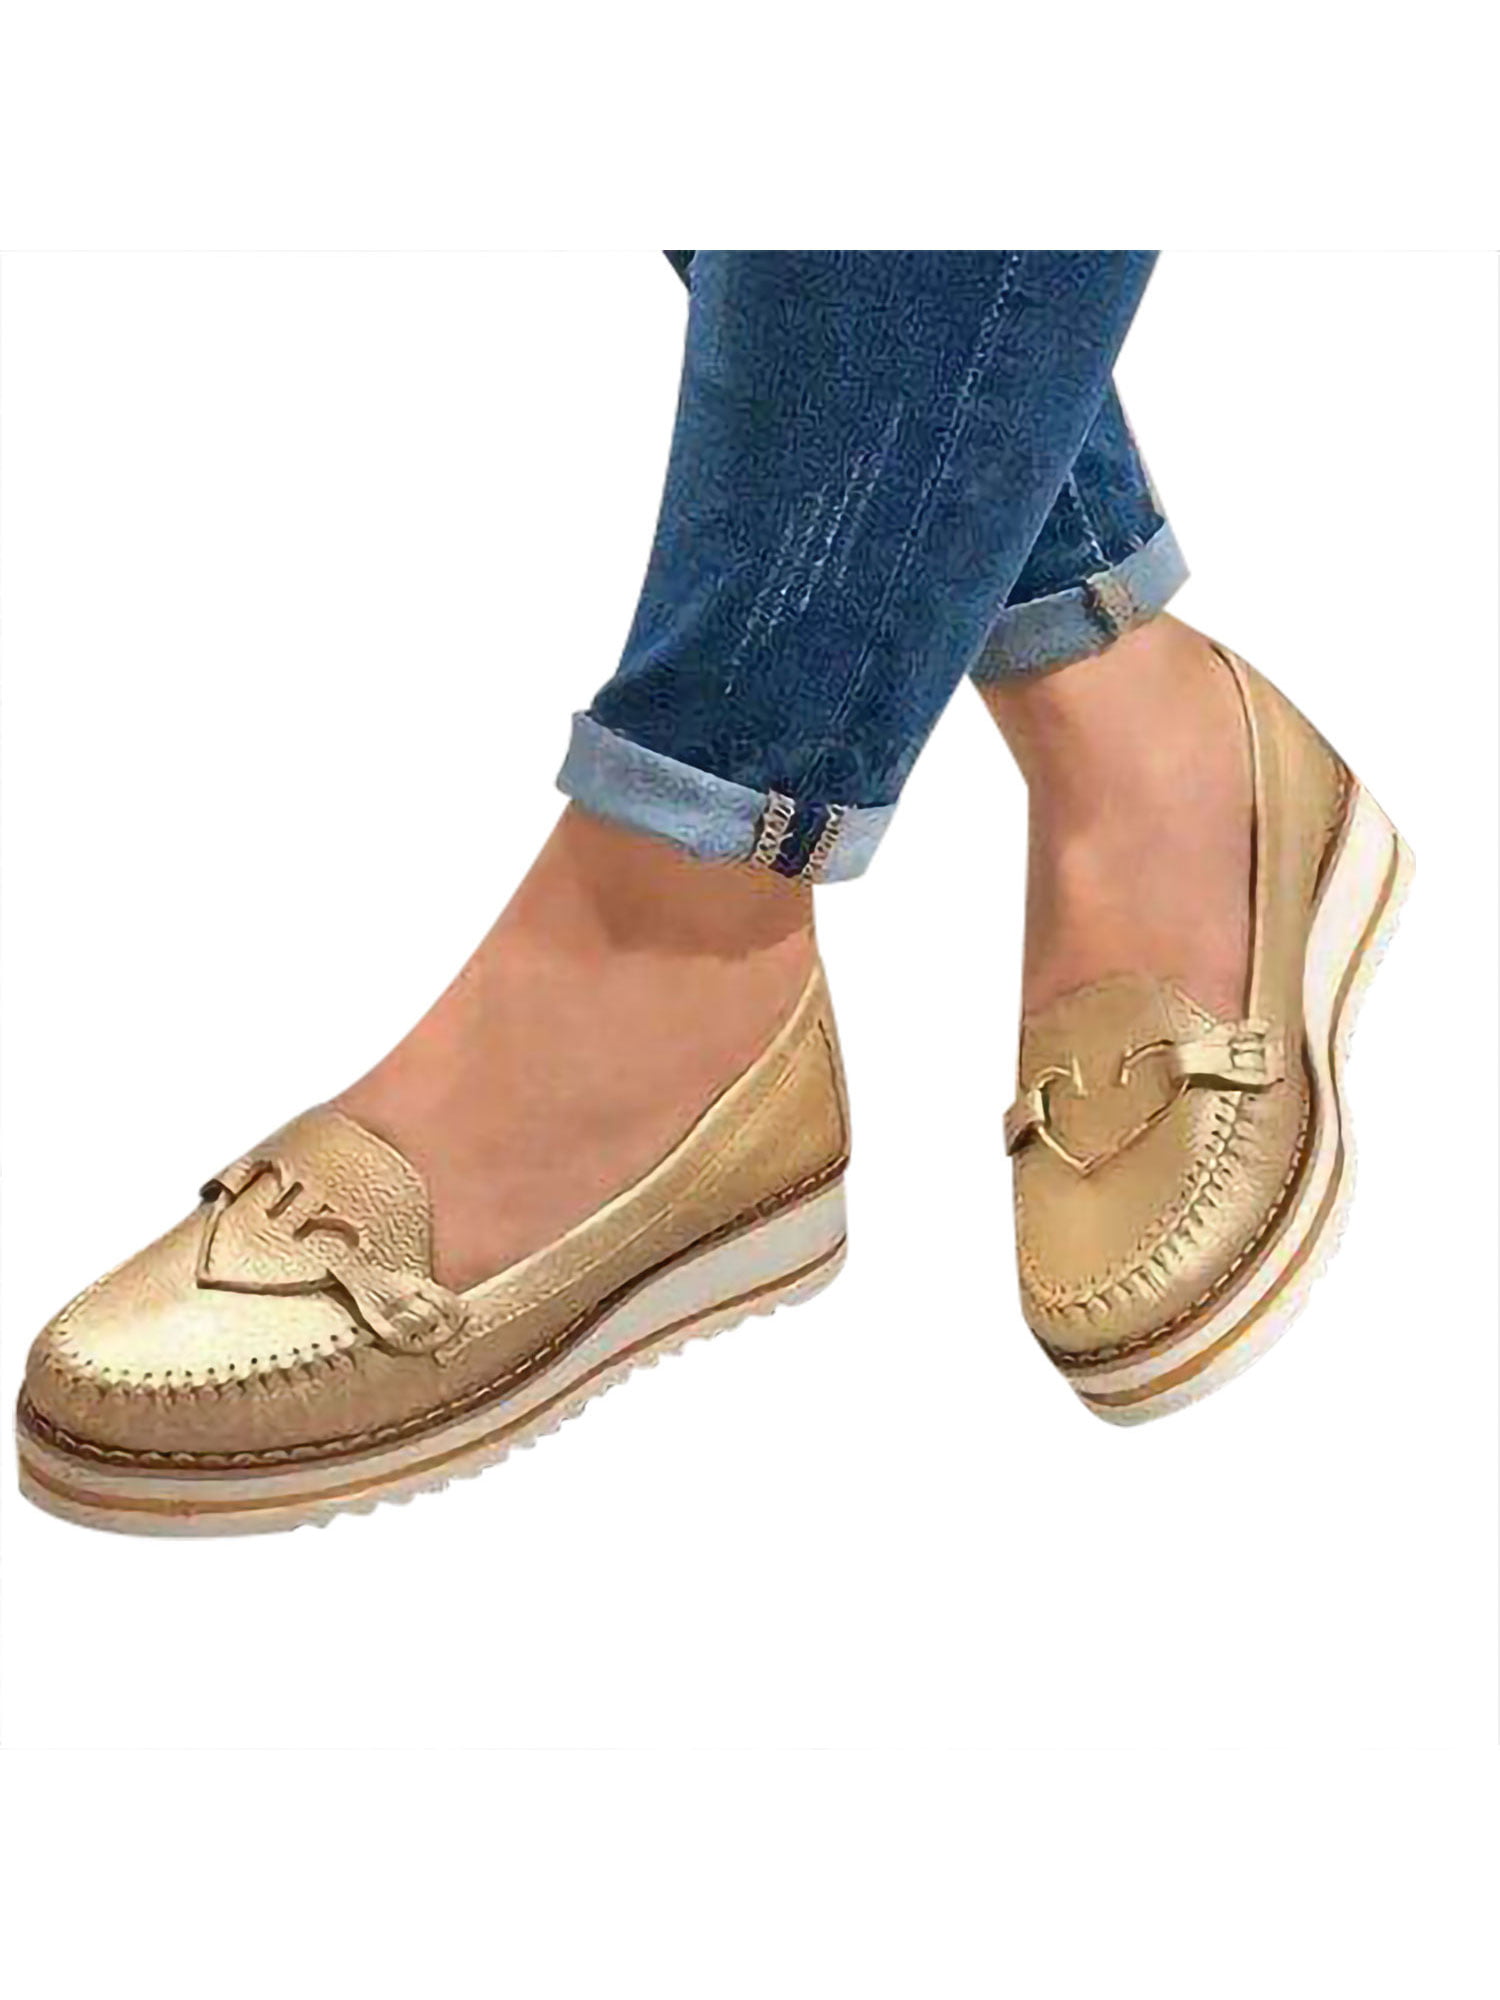 Womens Pumps Moccasins Shoes Sequins Wedge Mid Heel Bowknot Slip On Loafers Chic 